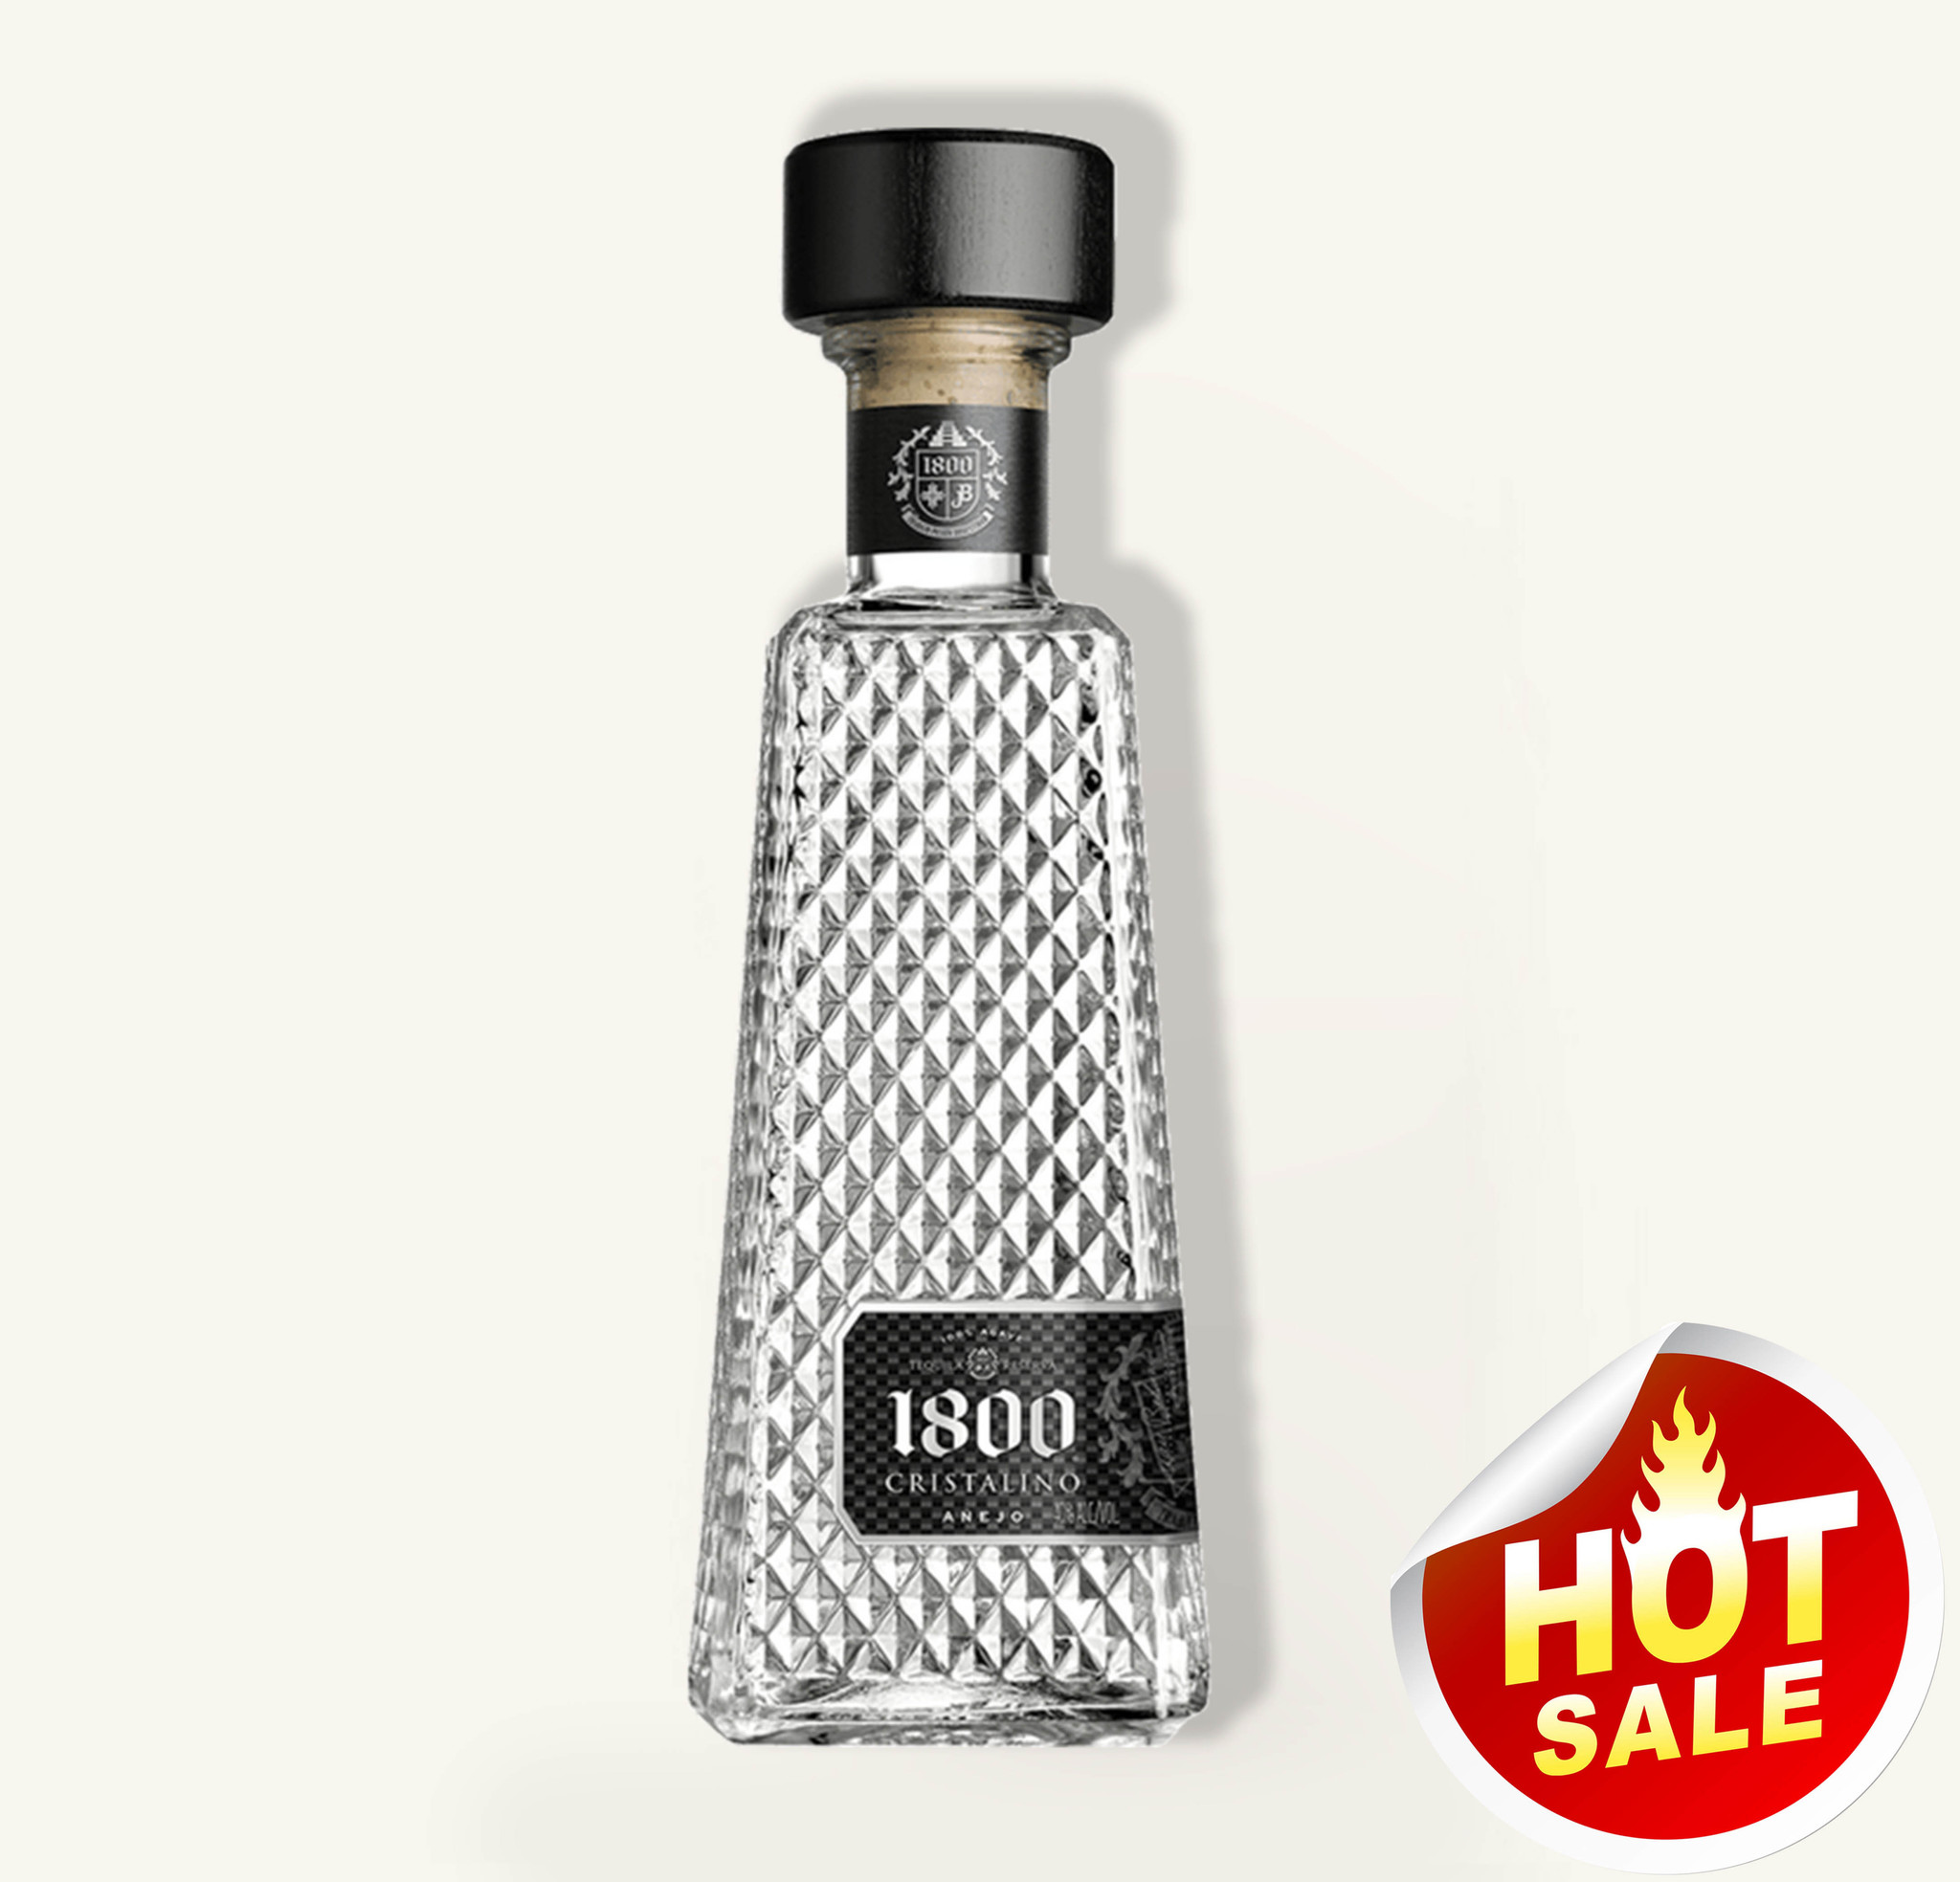 1800 Cristalino Anejo Tequila 750ml $52 FREE DELIVERY - Uncle Fossil  Wine&Spirits